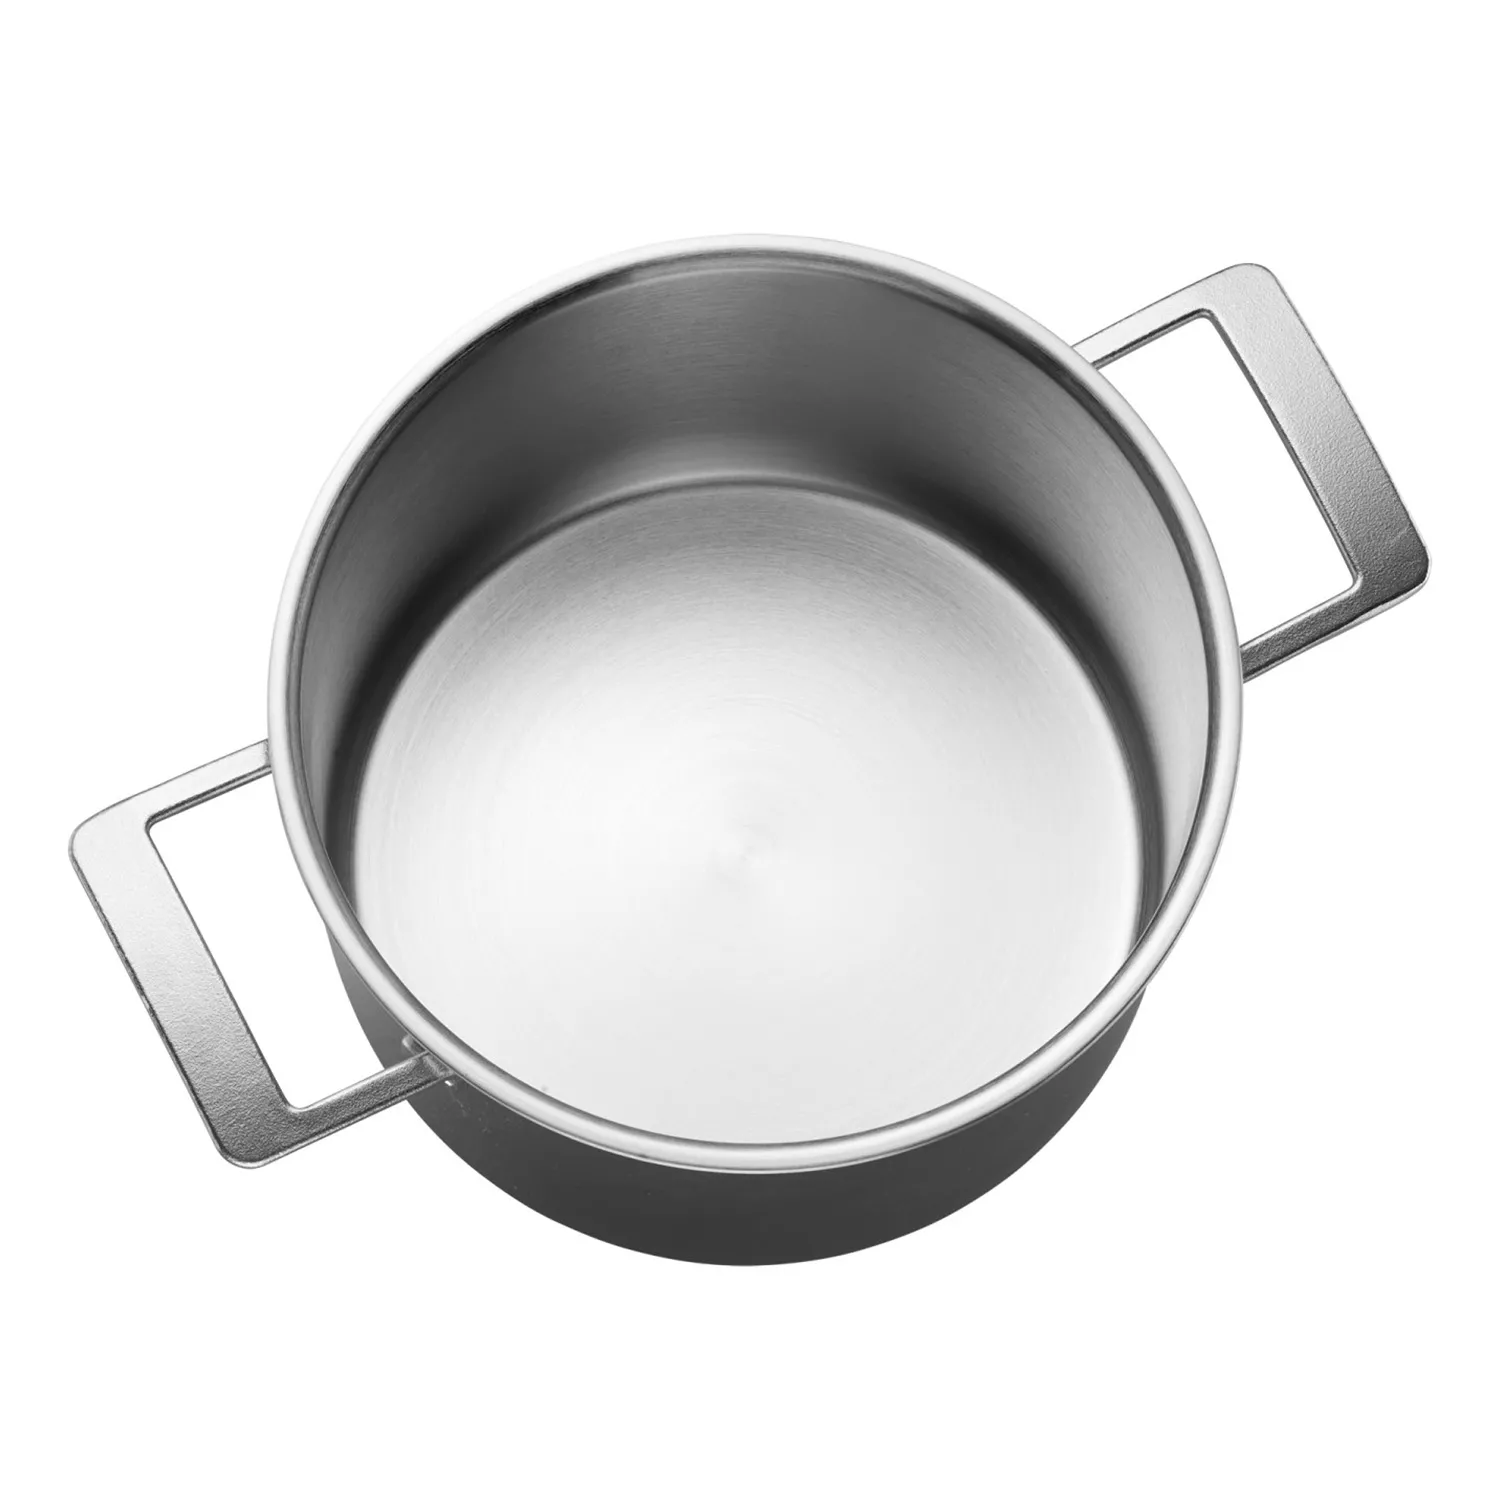 Lidded stainless steel cooking pot, 24cm/11L, Commercial - Demeyere